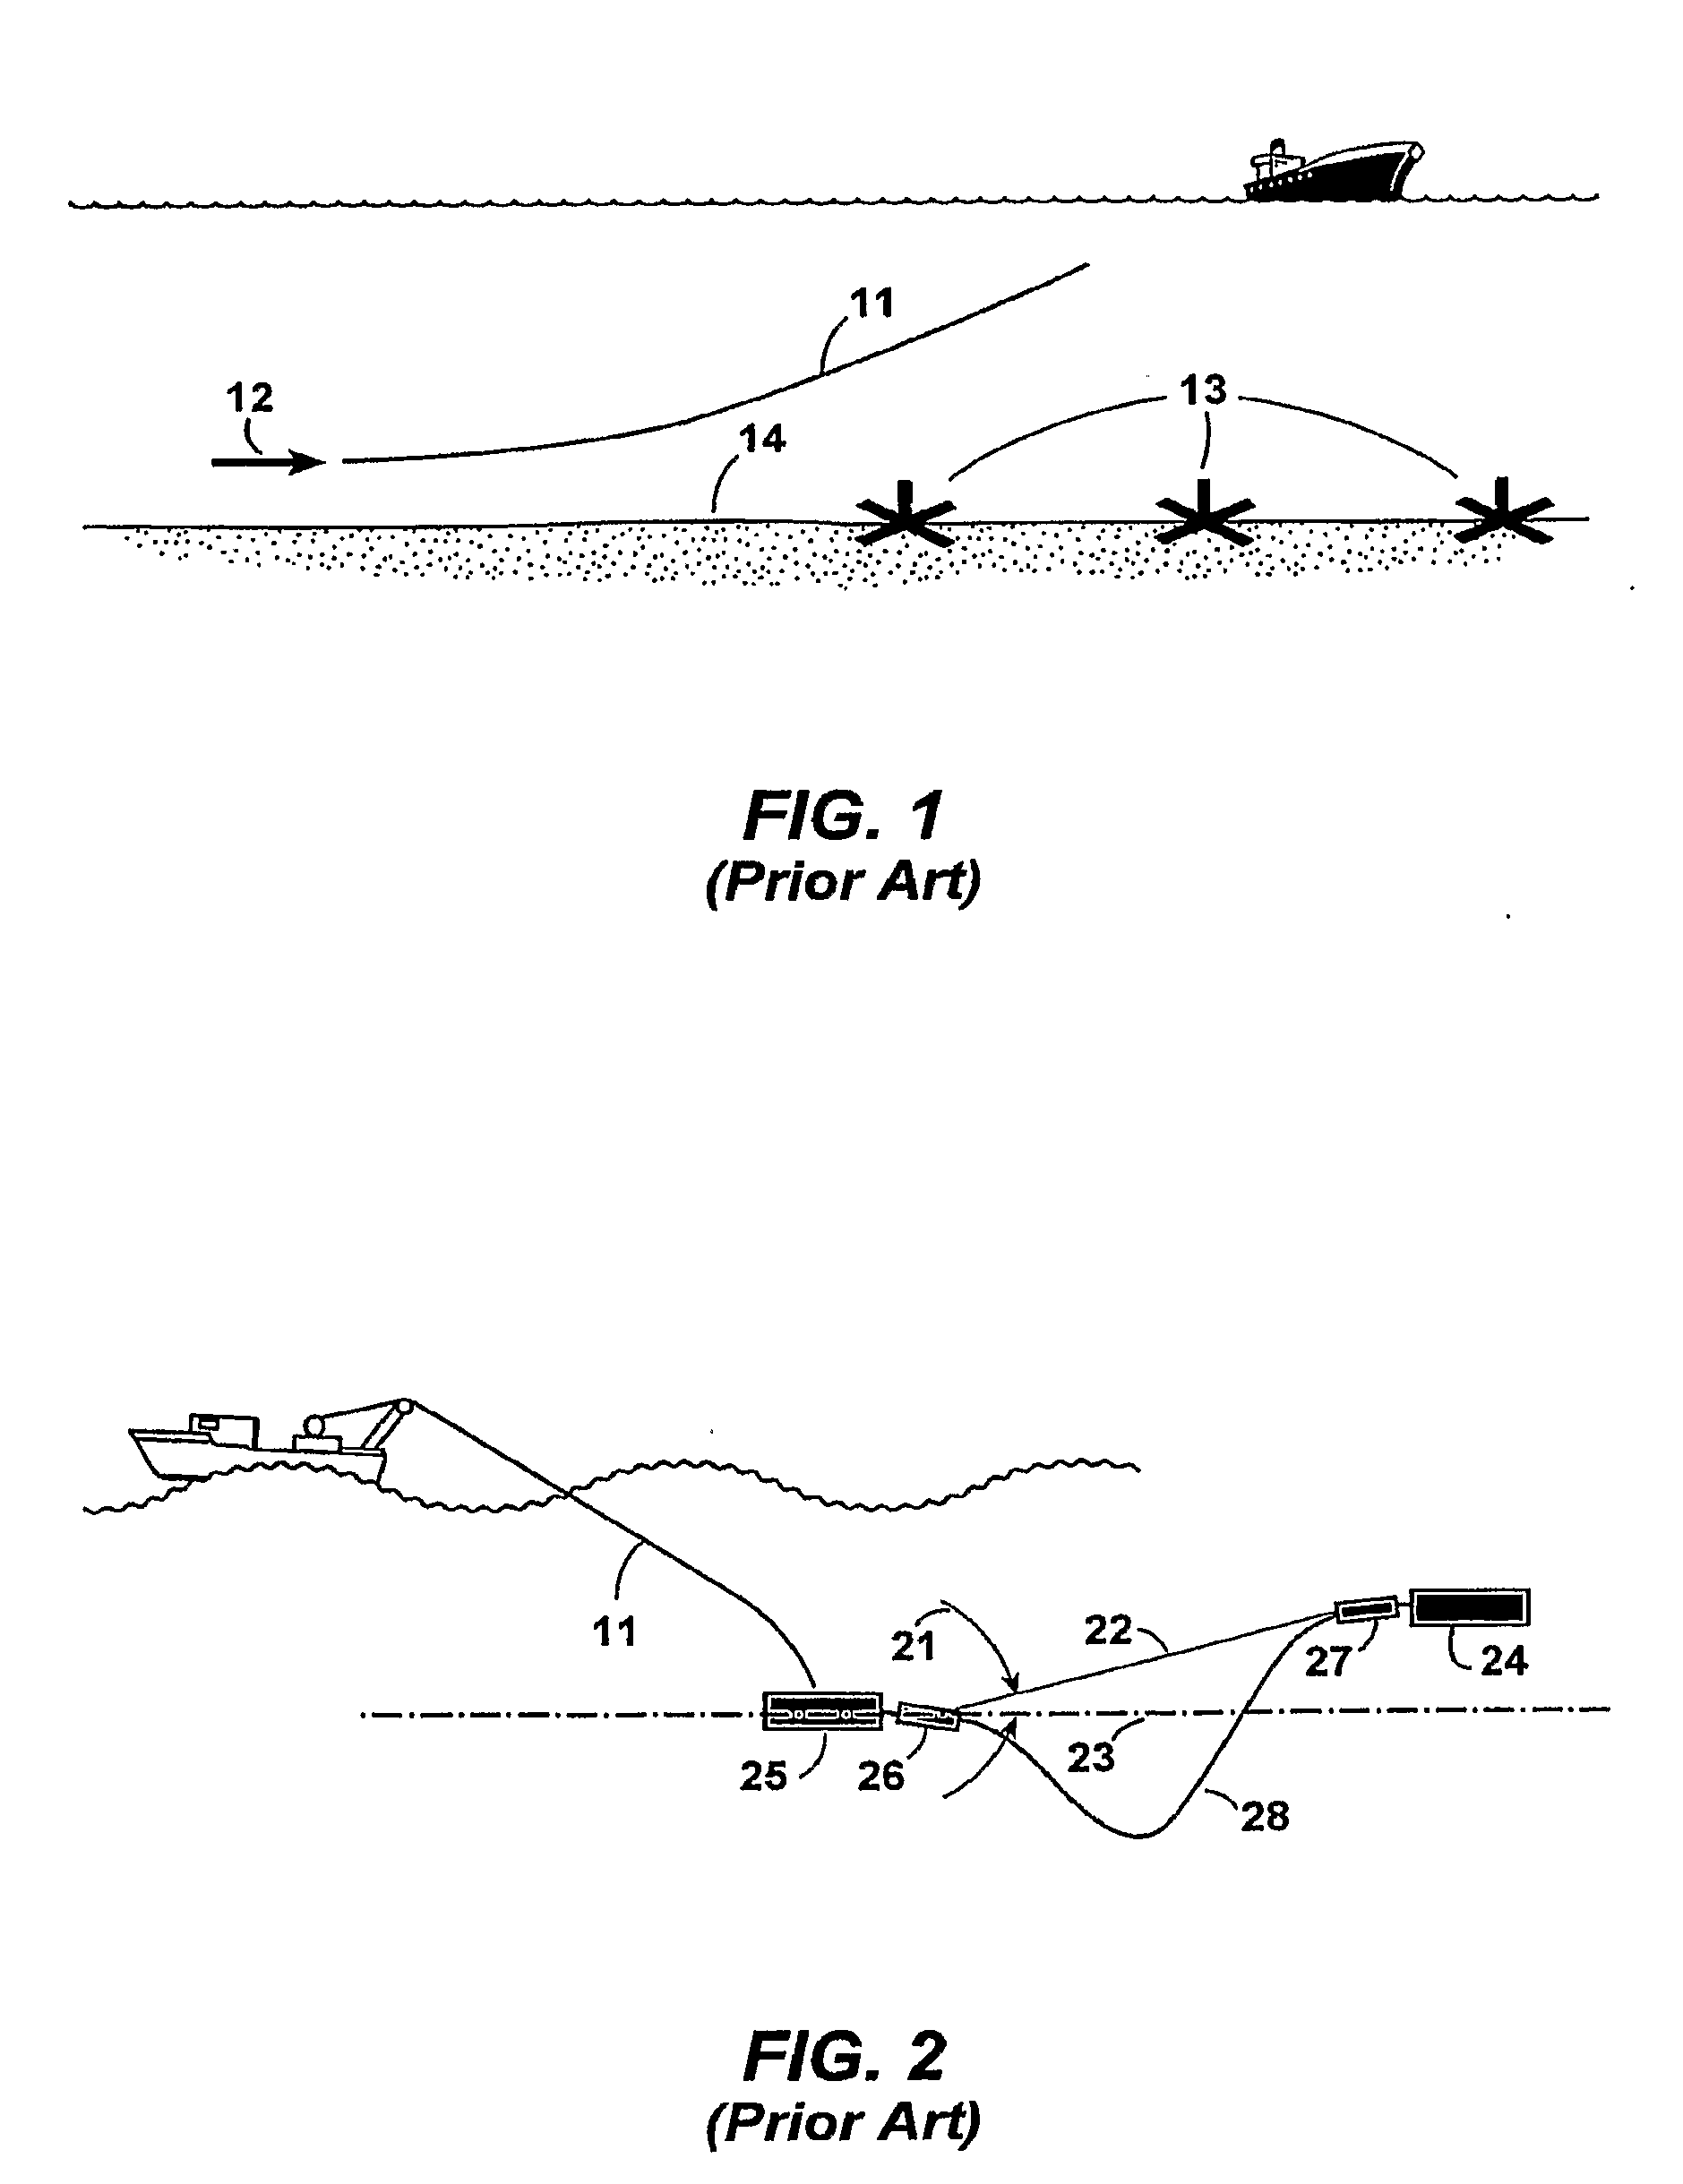 Method to maintain towed dipole source orientation